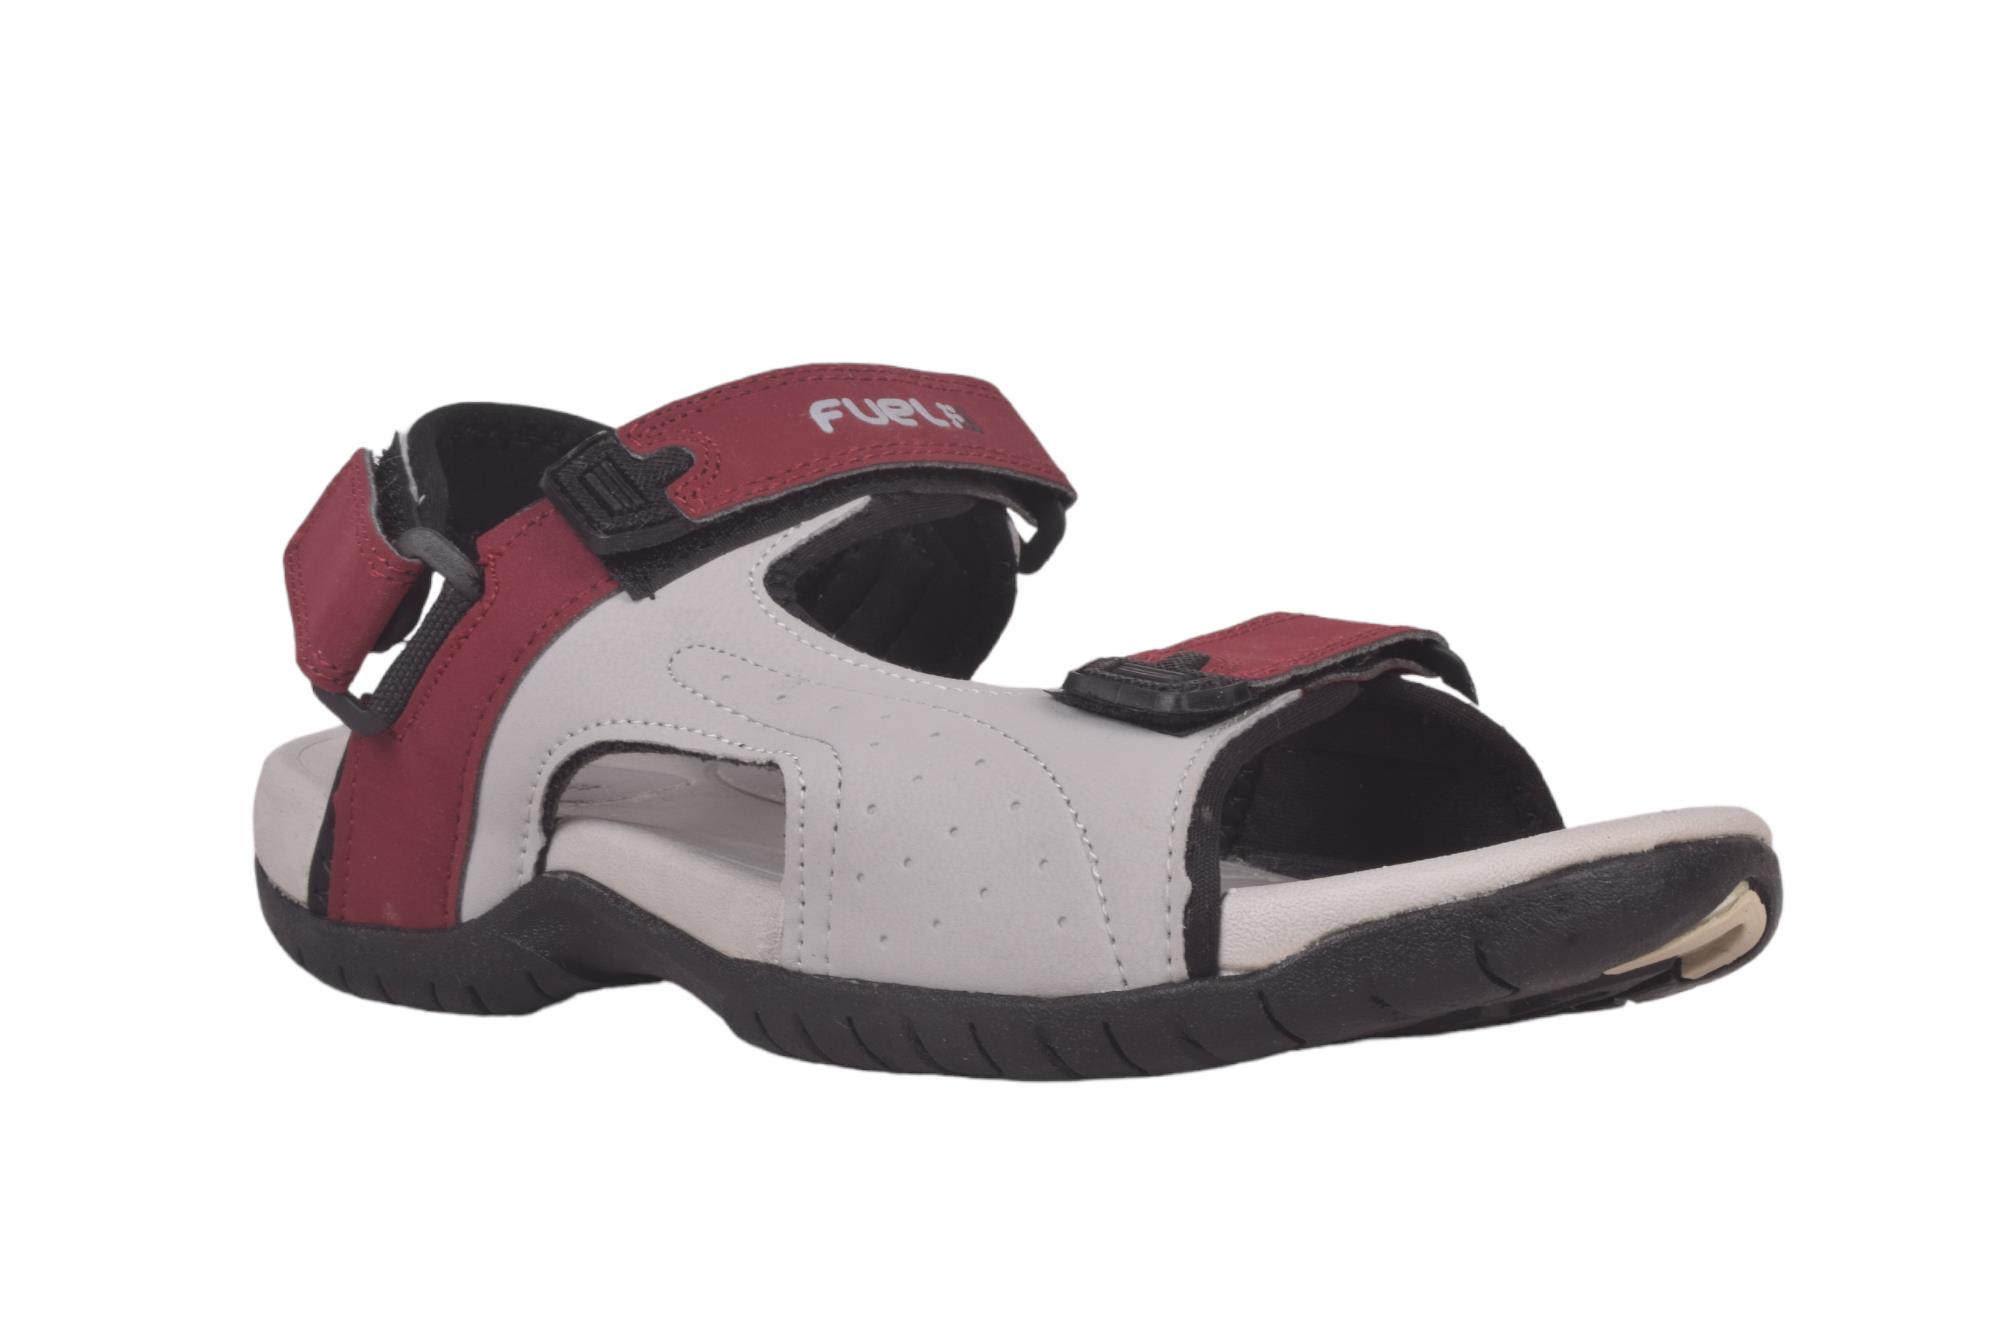 Buy Campus SD-PF016 BLK/RED Men's Sandals & Floaters 6 UK at Amazon.in